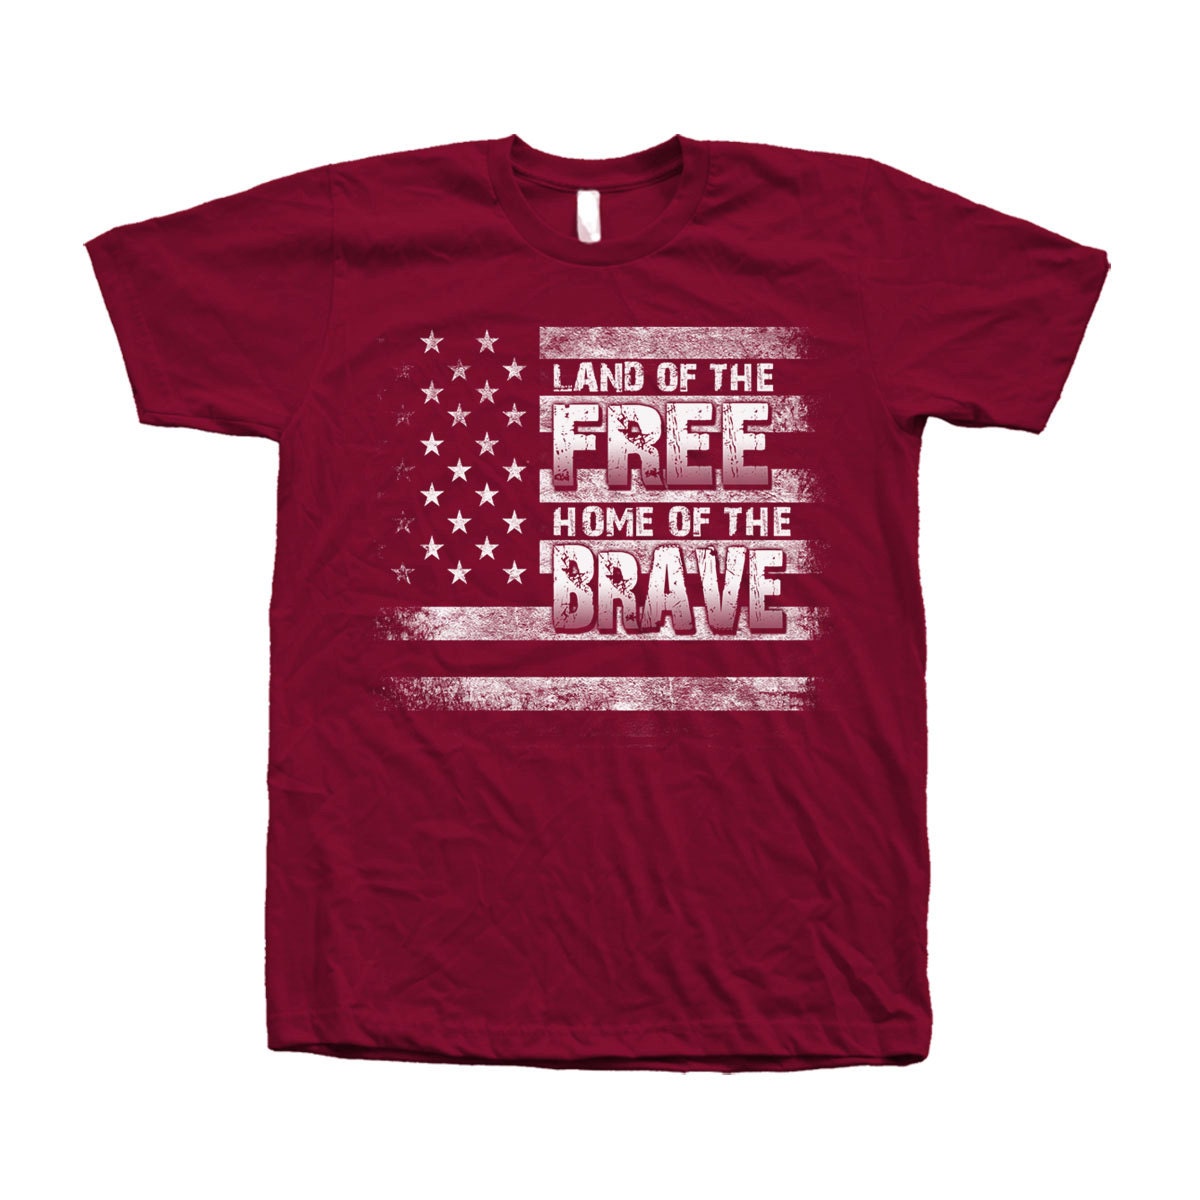 home of the brave shirt